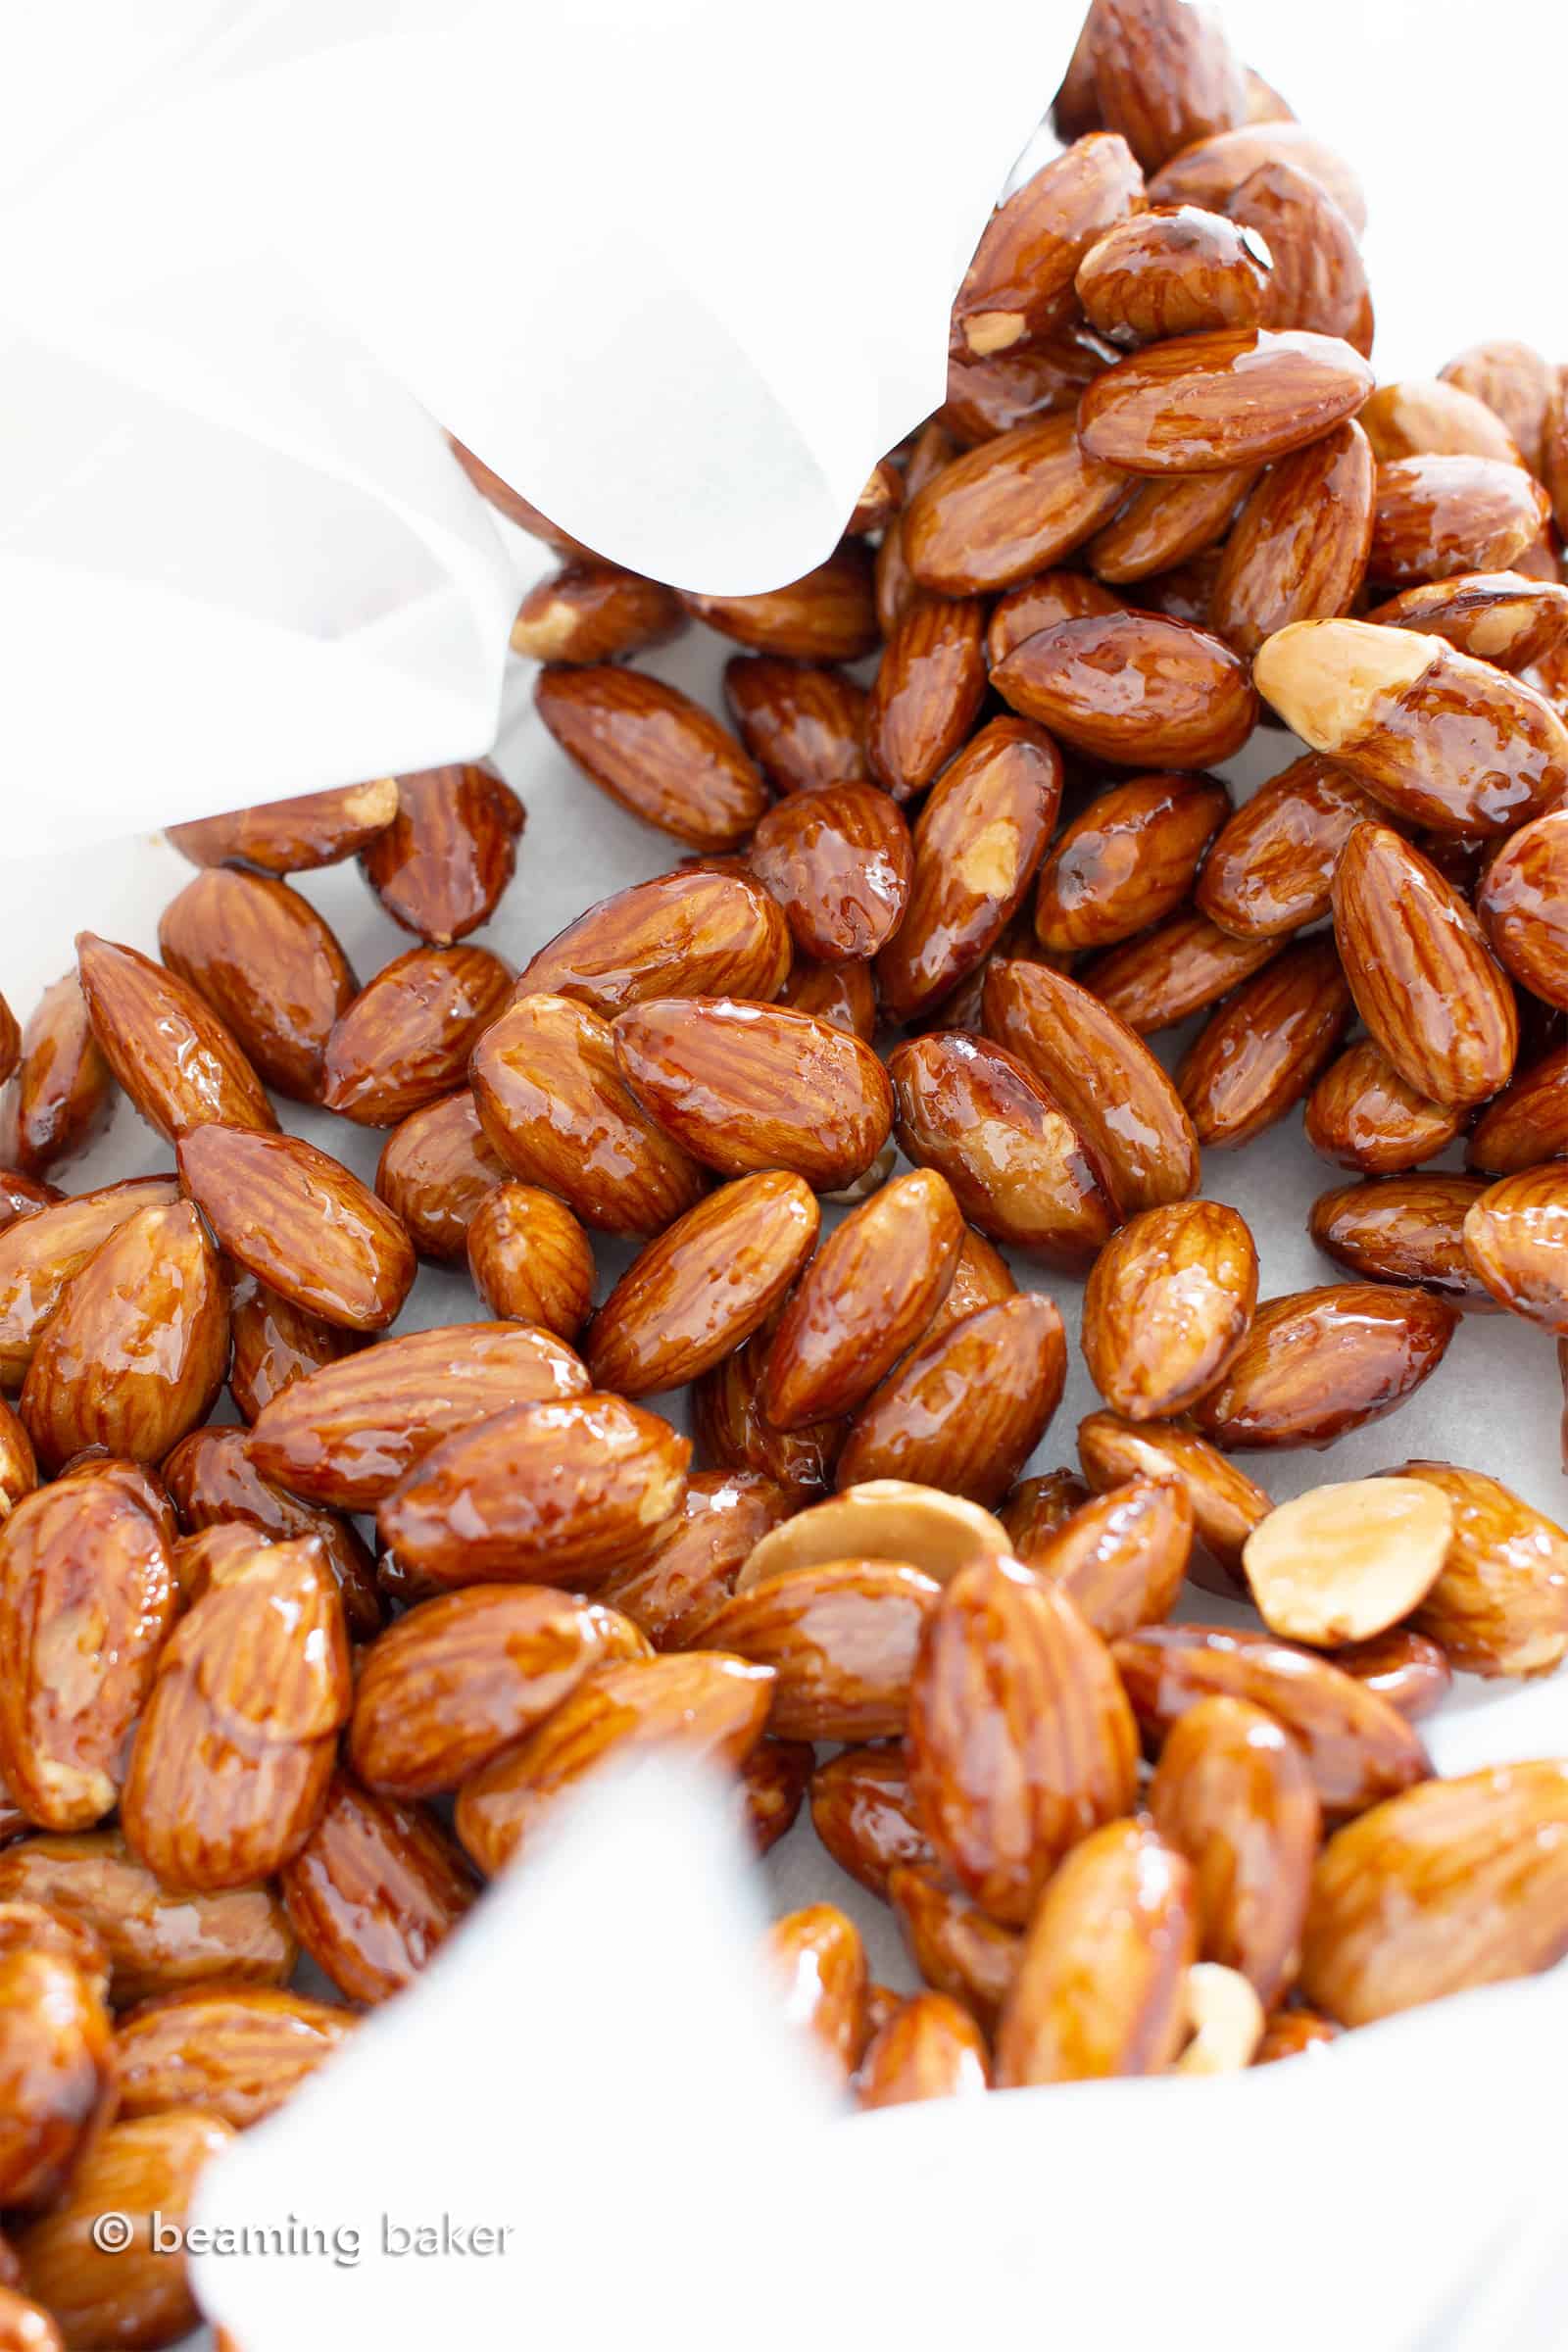 Paleo Candied Almonds: 5-minute stovetop EASY candied almonds recipe! Learn how to make the BEST vegan candied almonds—sweet, healthy & gluten free! #Almonds #Paleo #Vegan #Healthy #Christmas | Recipe at BeamingBaker.com